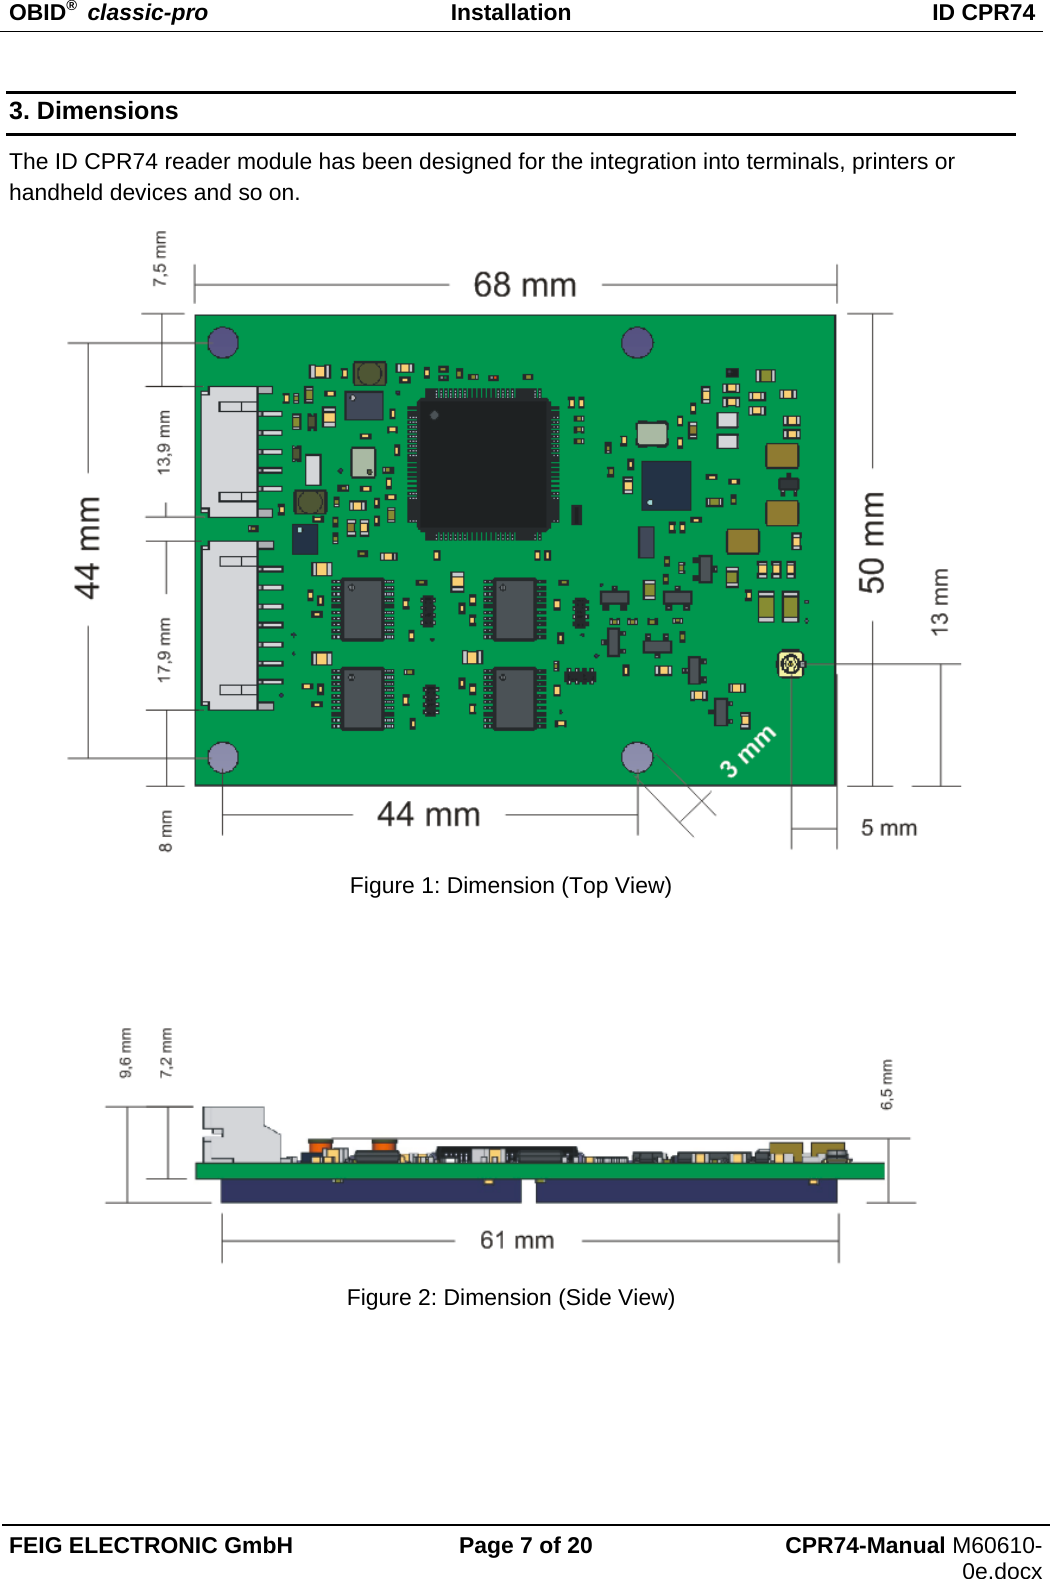 OBID®  classic-pro Installation  ID CPR74 FEIG ELECTRONIC GmbH  Page 7 of 20  CPR74-Manual M60610-0e.docx 3. Dimensions The ID CPR74 reader module has been designed for the integration into terminals, printers or handheld devices and so on.  Figure 1: Dimension (Top View)     Figure 2: Dimension (Side View)    